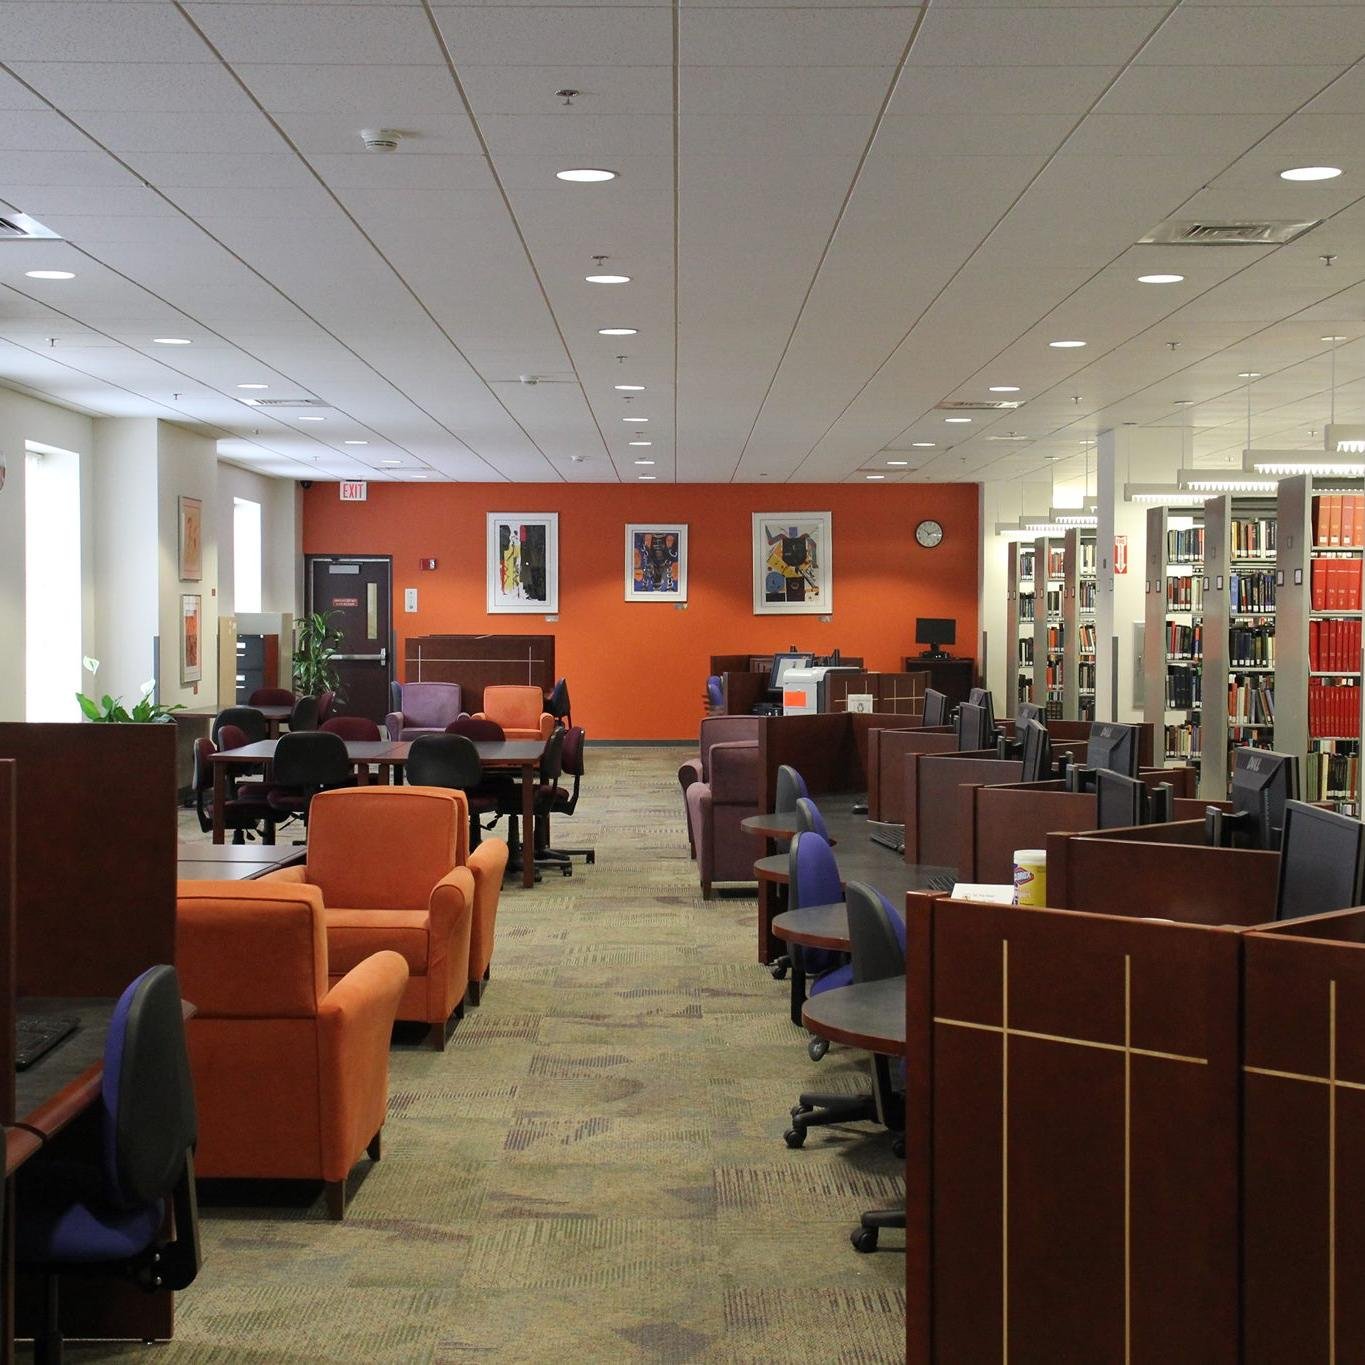 We are the Harold Schiffman Music Library at UNCG - ready to help you with your music and information needs!